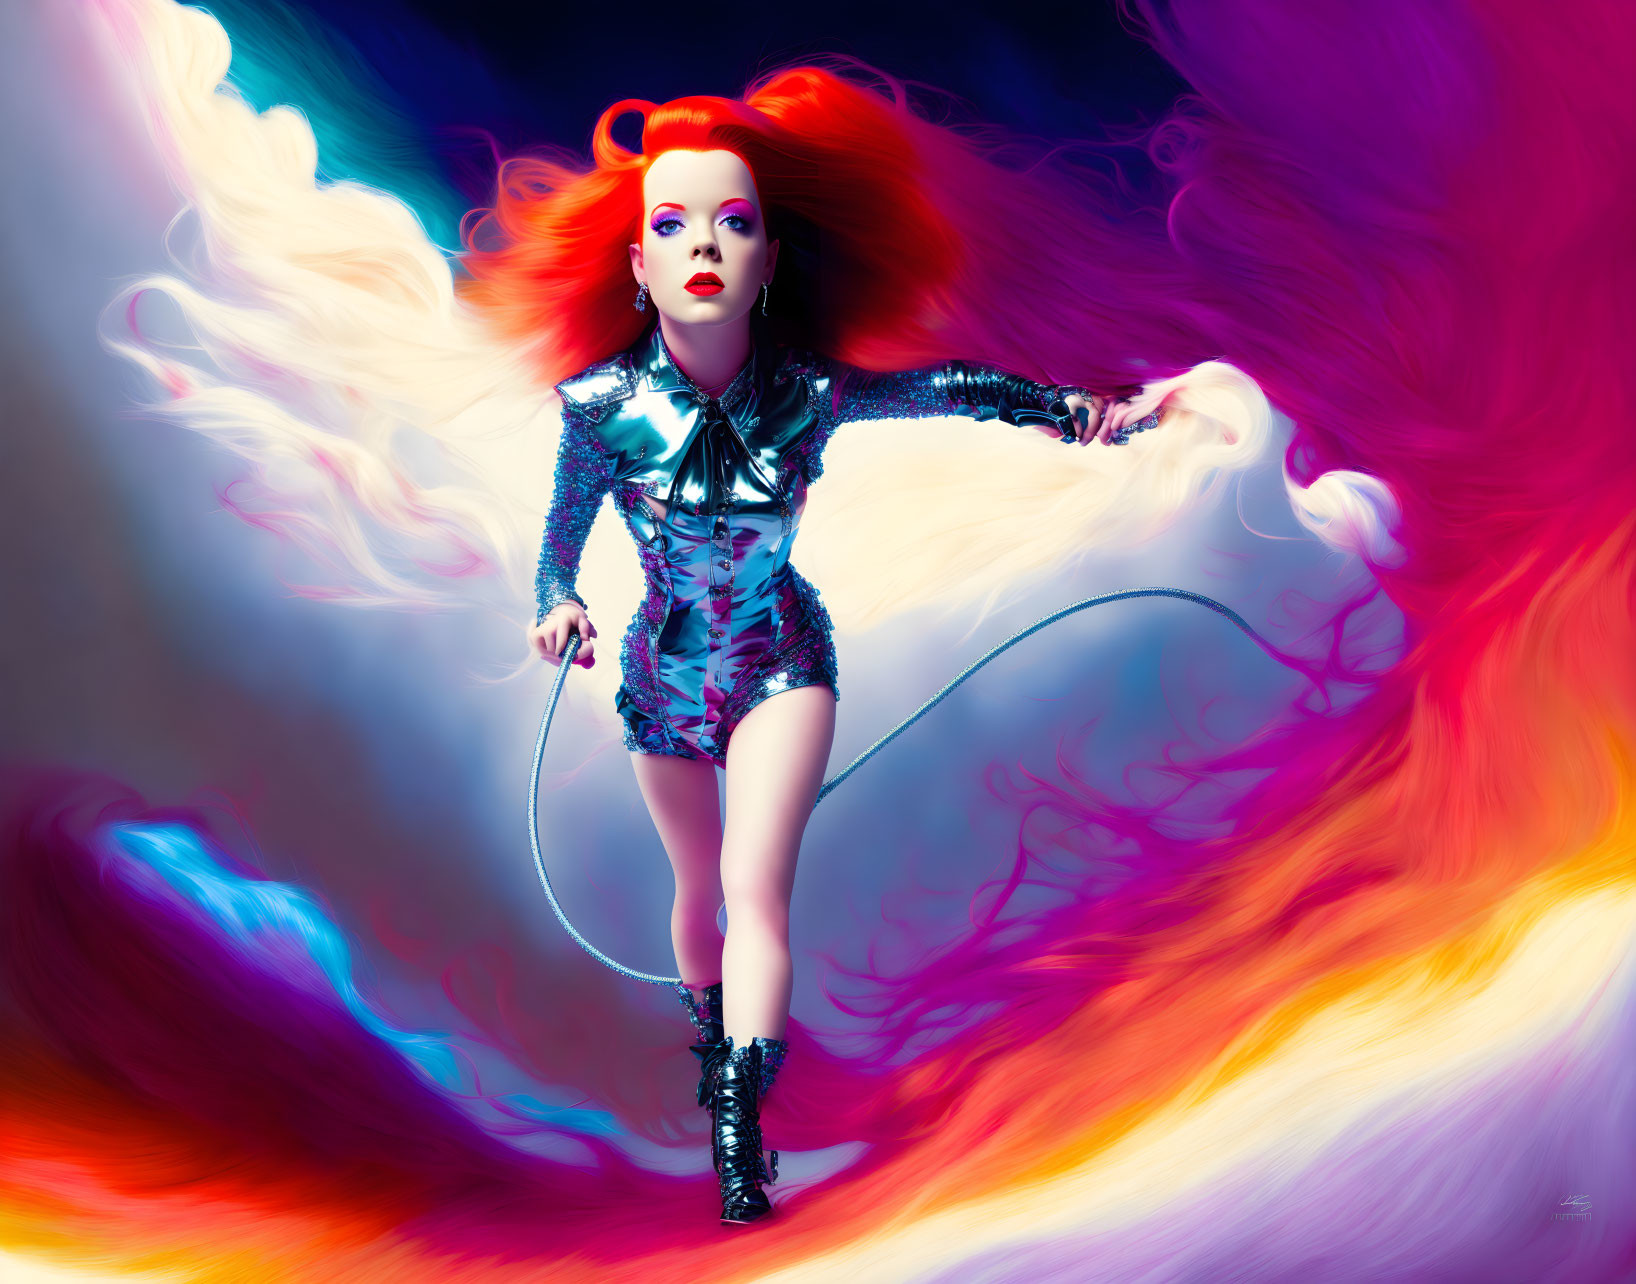 Colorful image of person with red hair skipping rope amidst dynamic swirls.